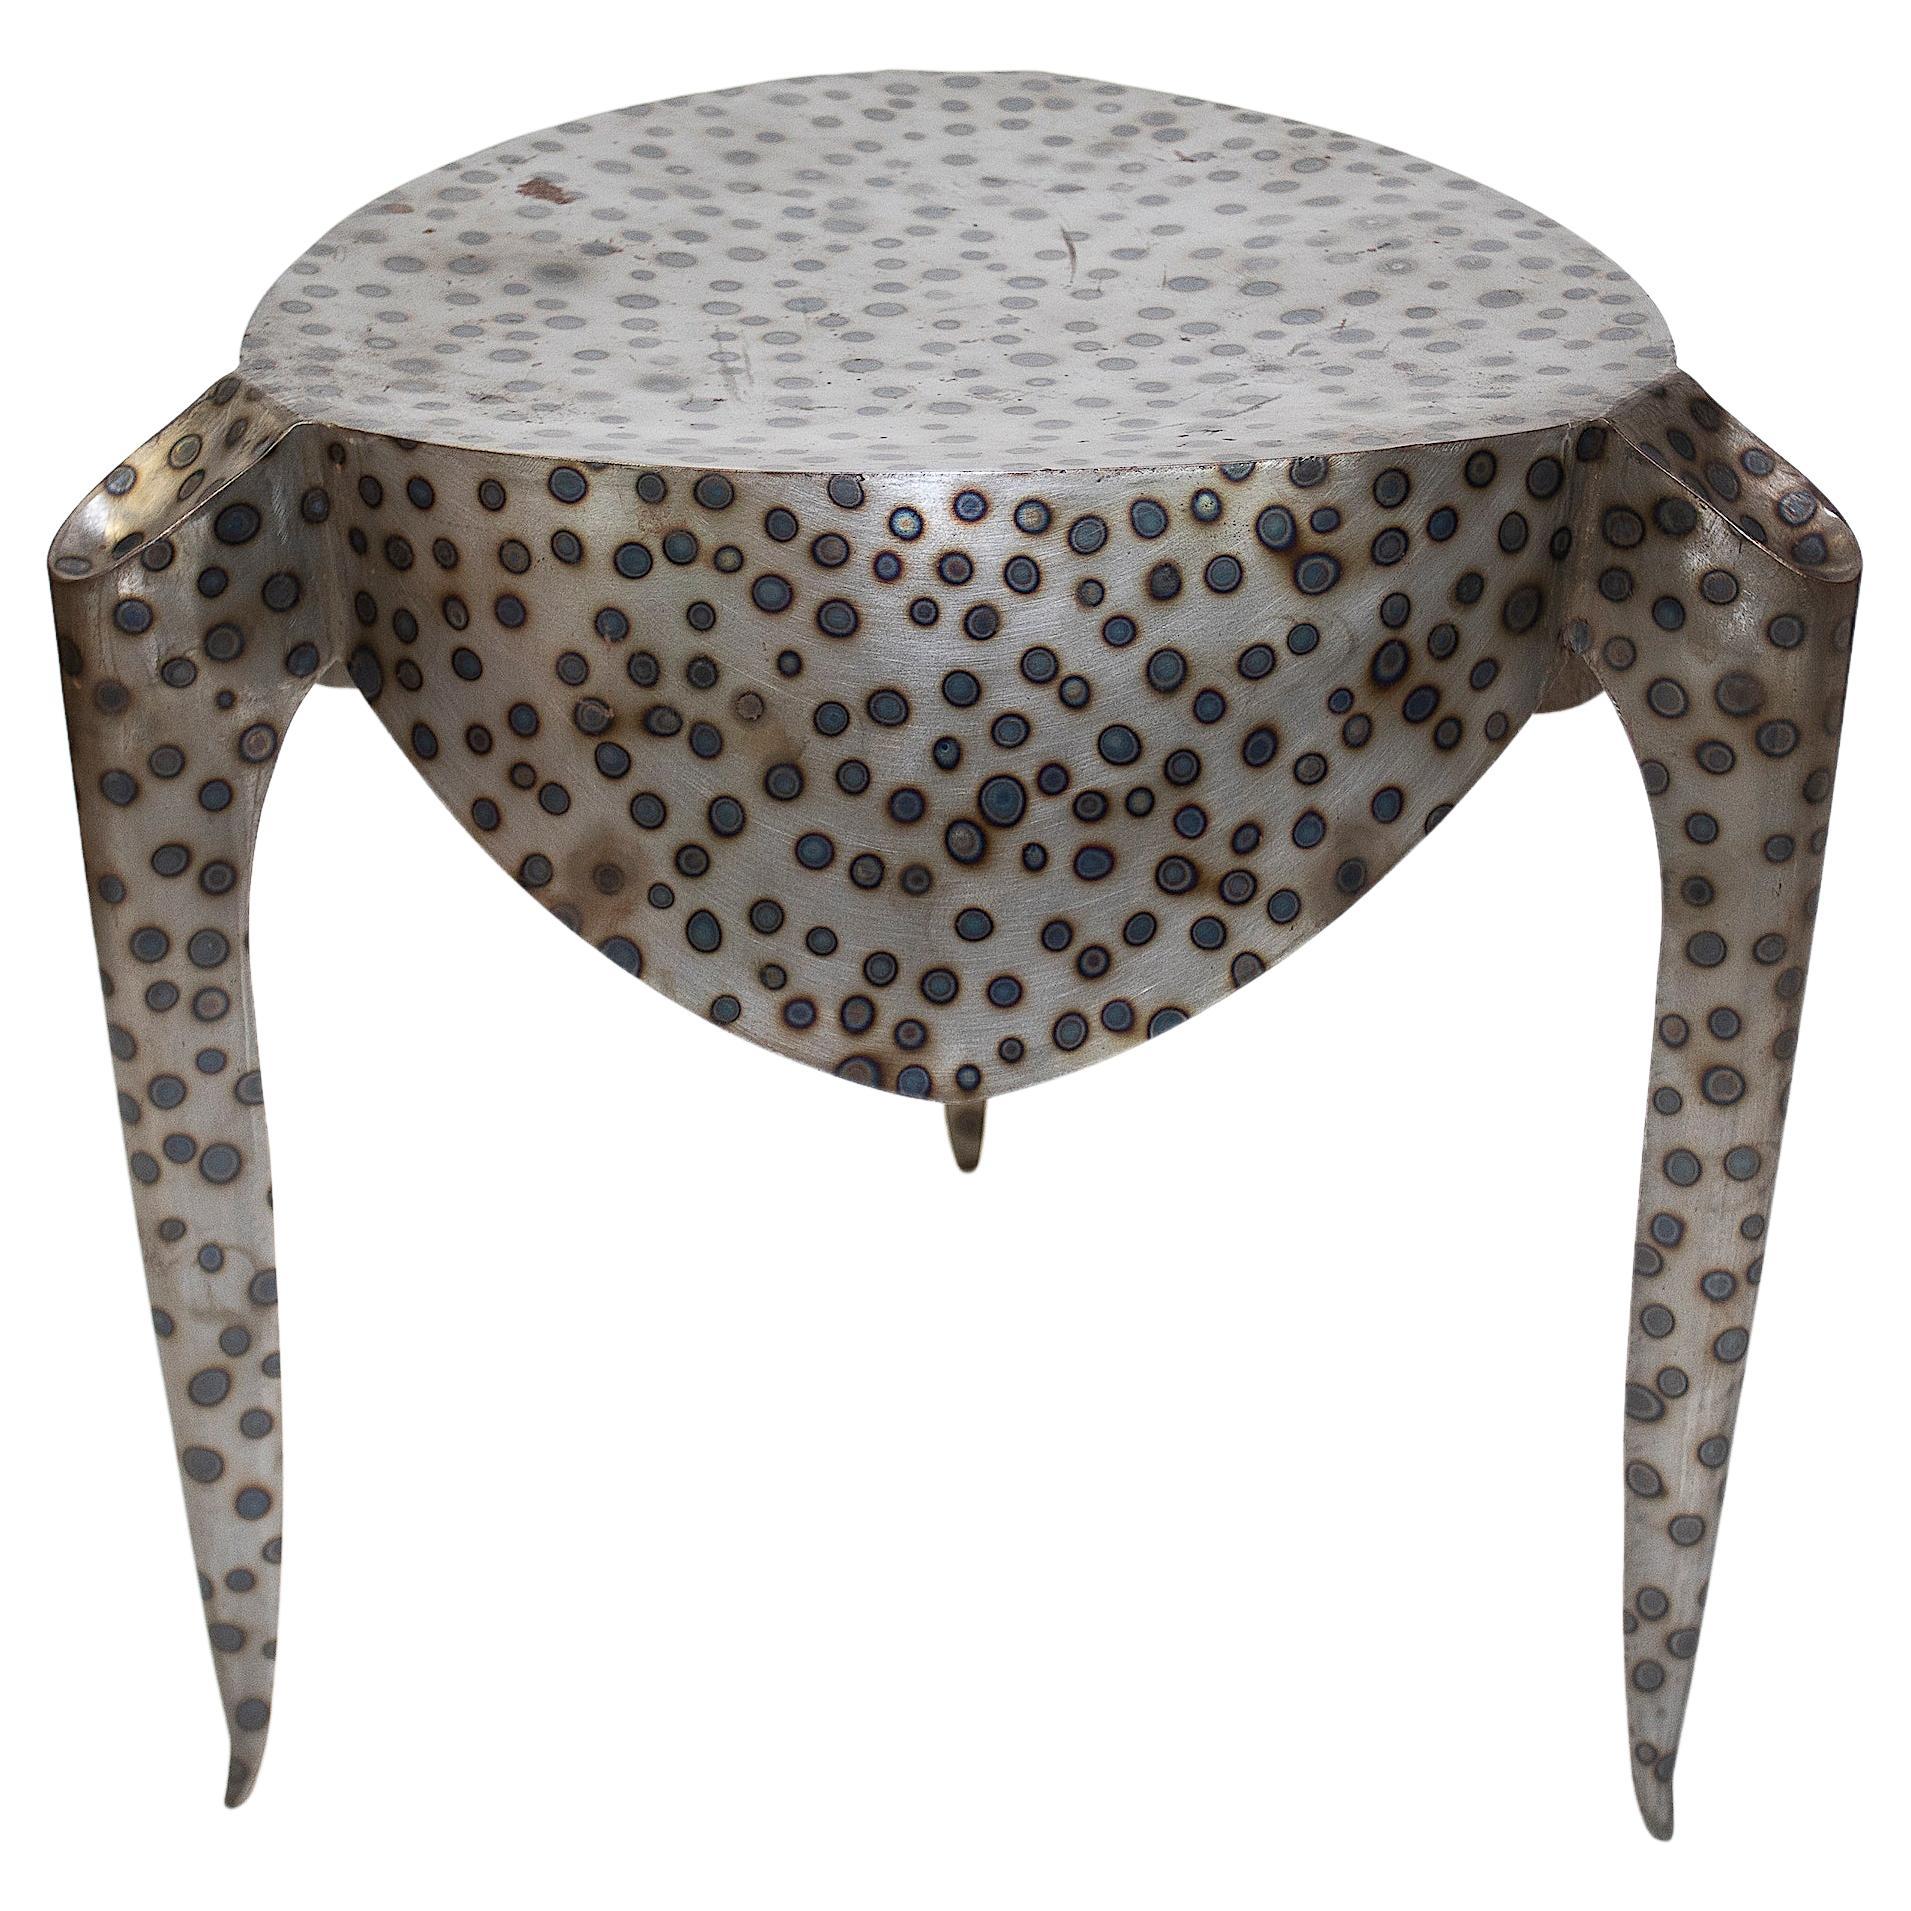 Andre Dubreuil Paris Table / Stool For Sale